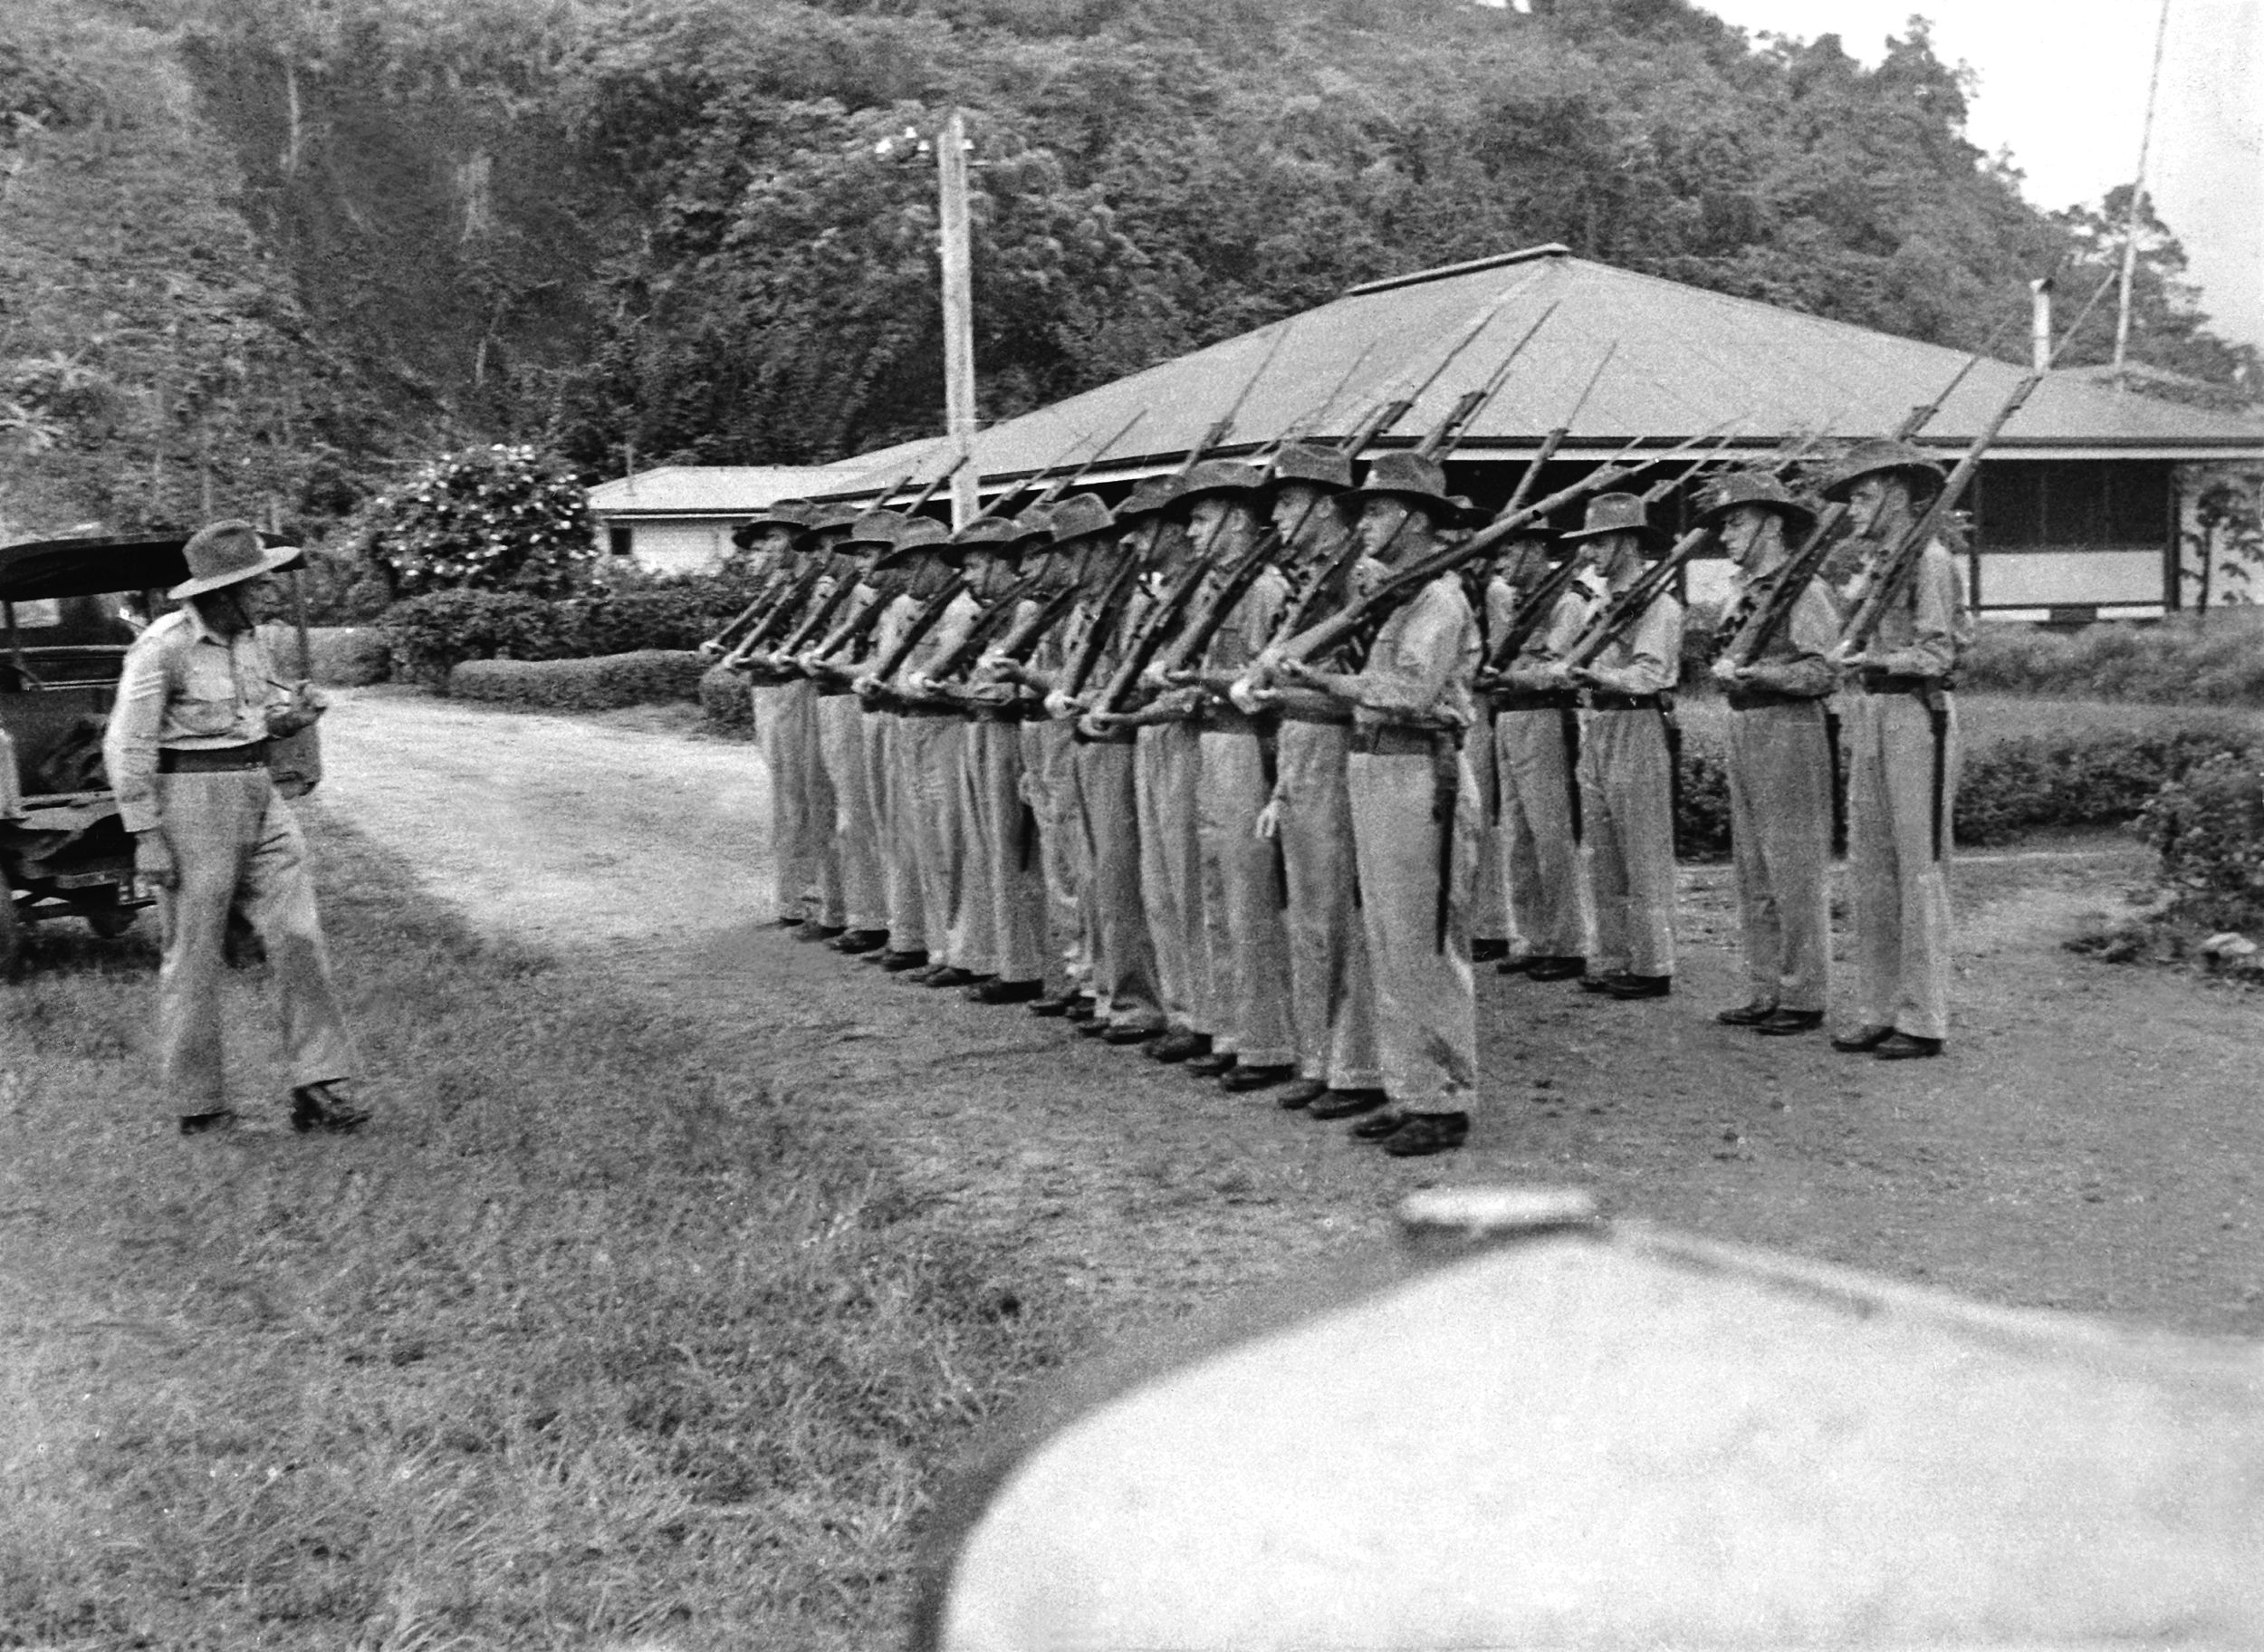 On April 25, 1940, the assembled Salamaua Platoon of the New Guinea Volunteer Rifles is drilled by its sergeant, a noncommissioned officer named Rogers.